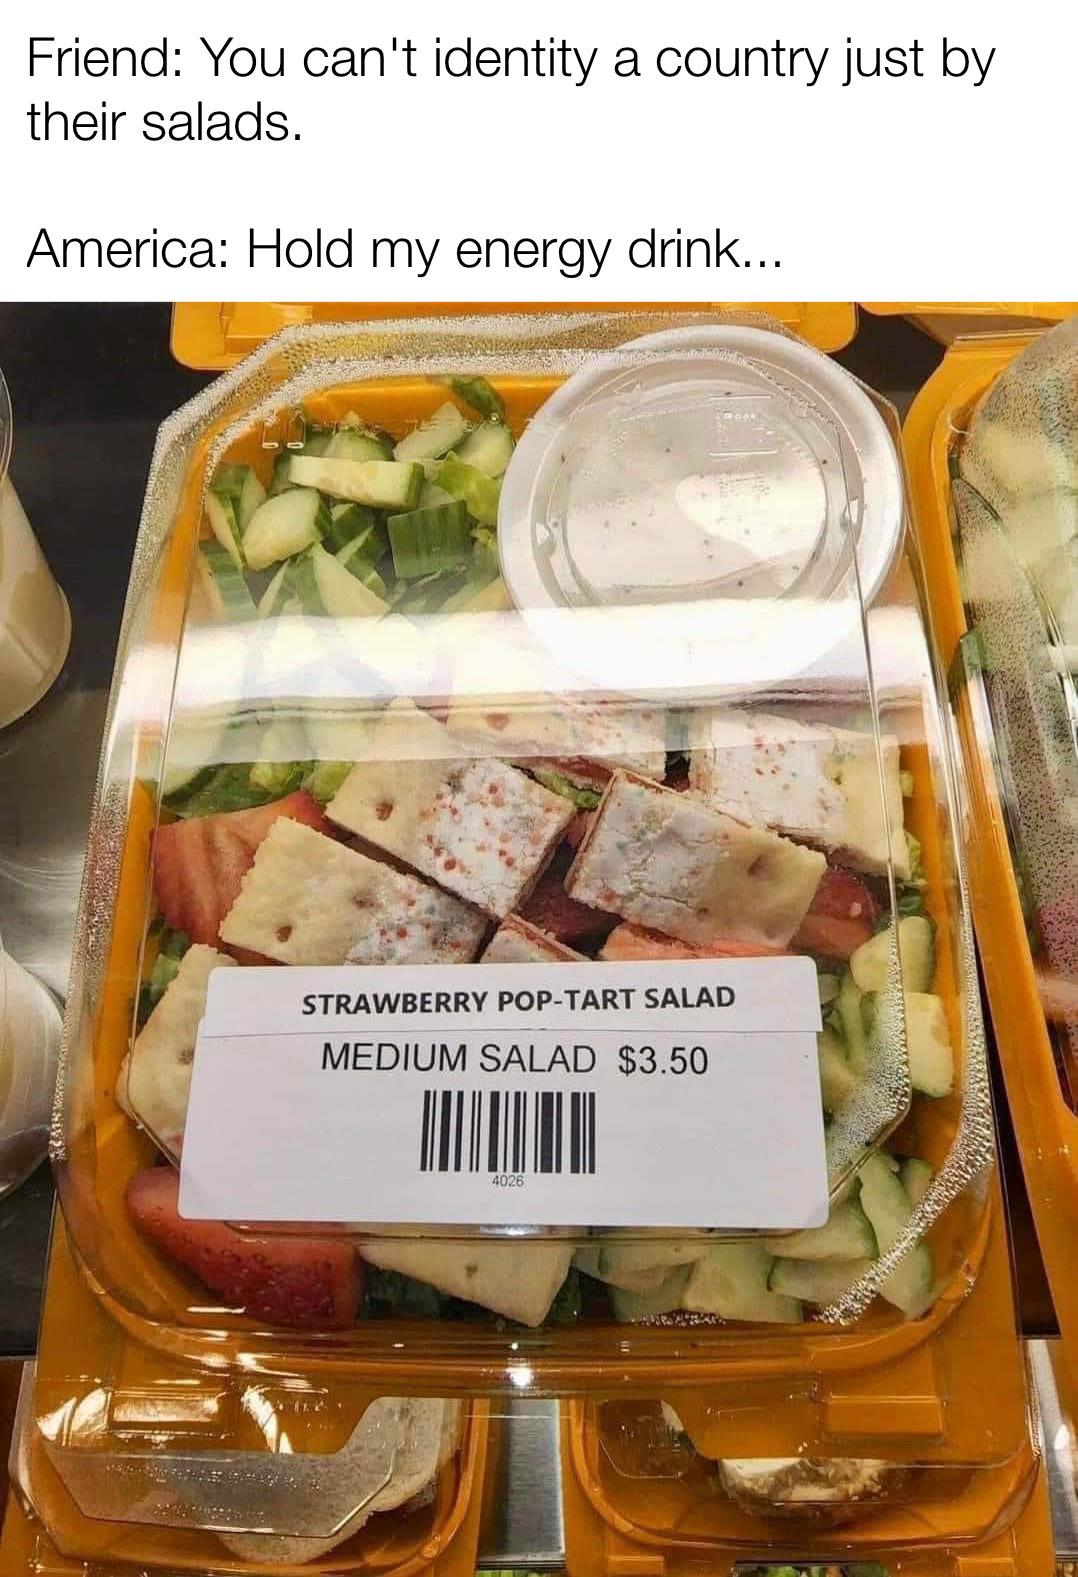 daily dose of randoms - strawberry pop tart salad - Friend You can't identity a country just by their salads. America Hold my energy drink... Hivy Strawberry PopTart Salad Medium Salad $3.50 4026 Cater